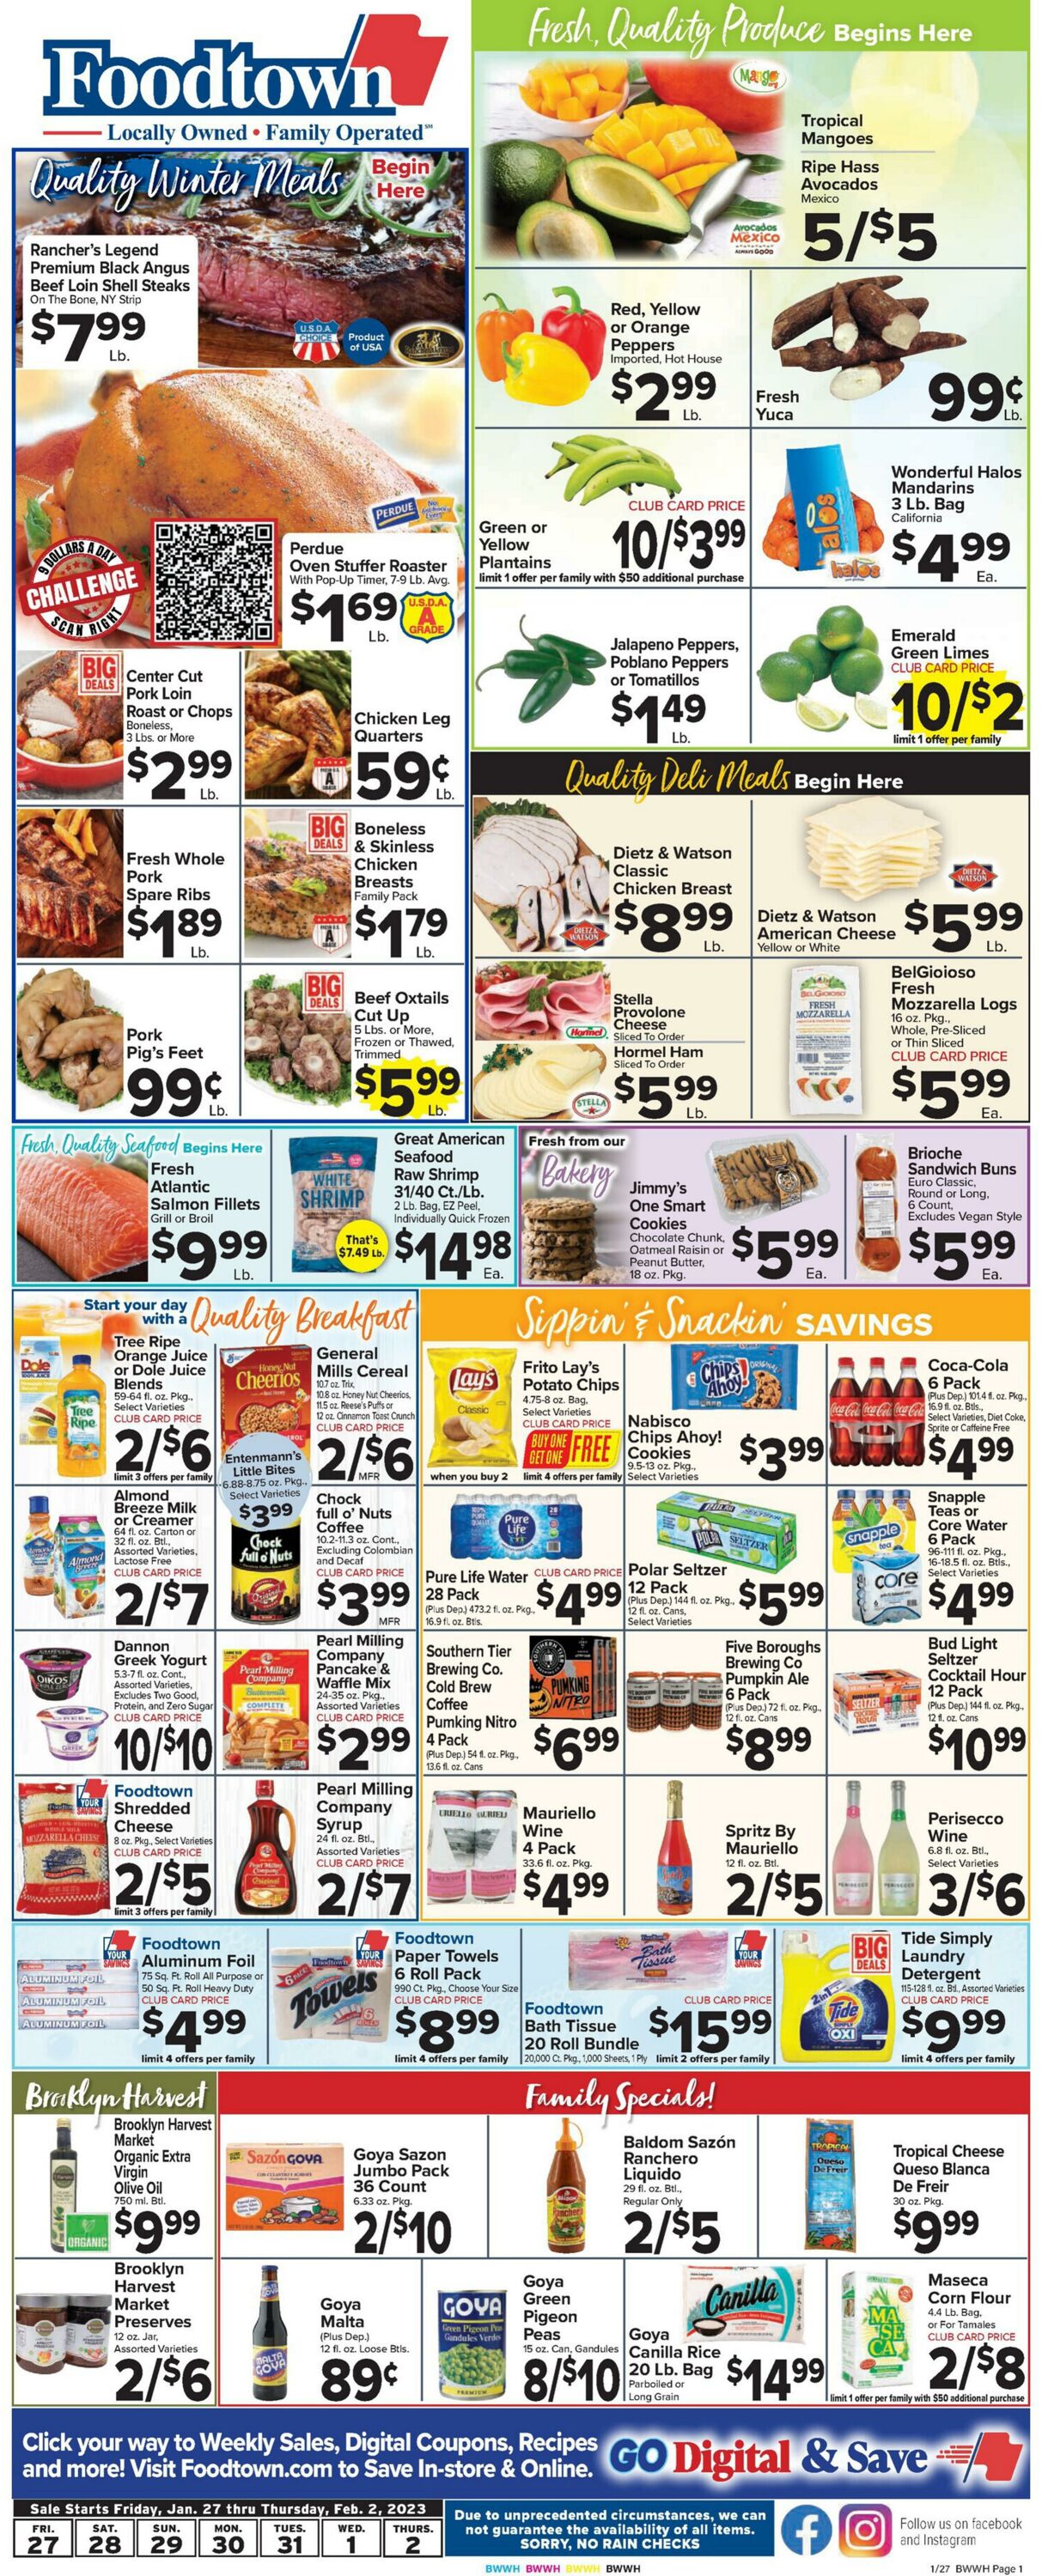 Food Town Promotional weekly ads